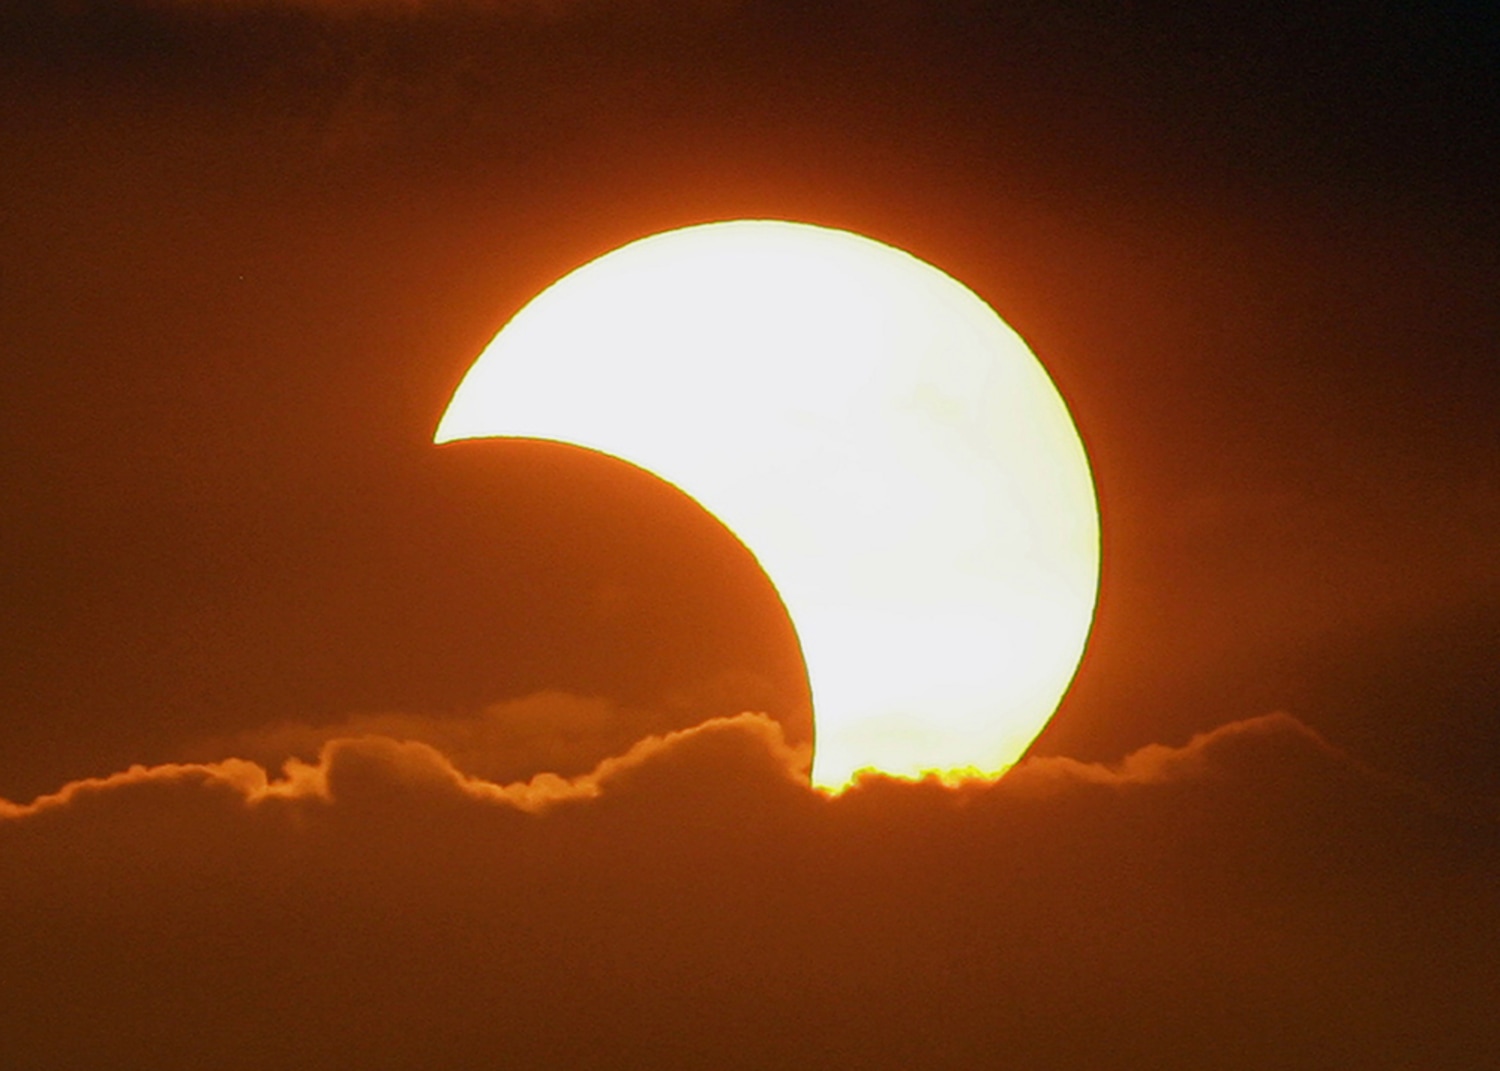 Watch for Sunday's strange solar eclipse on East Coast — and online